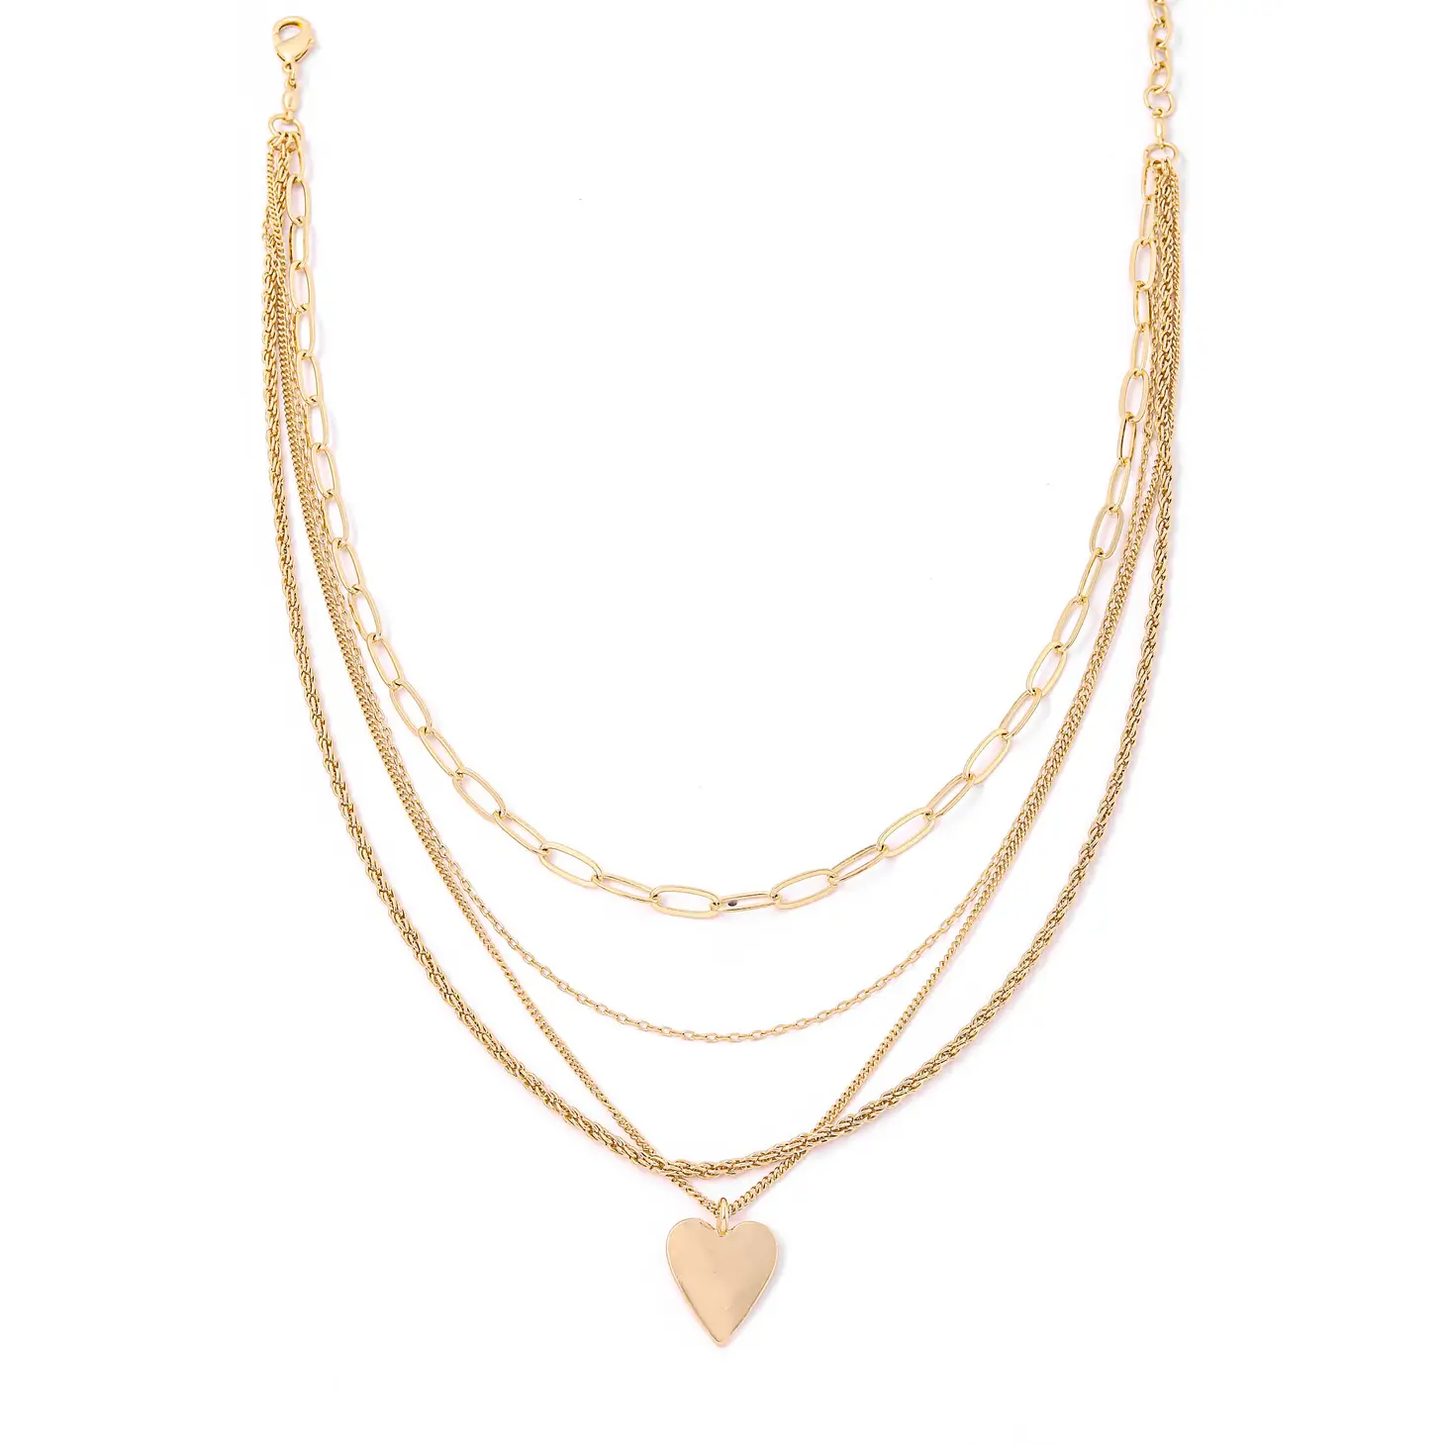 Key To My Heart Layered Necklace - GOLD